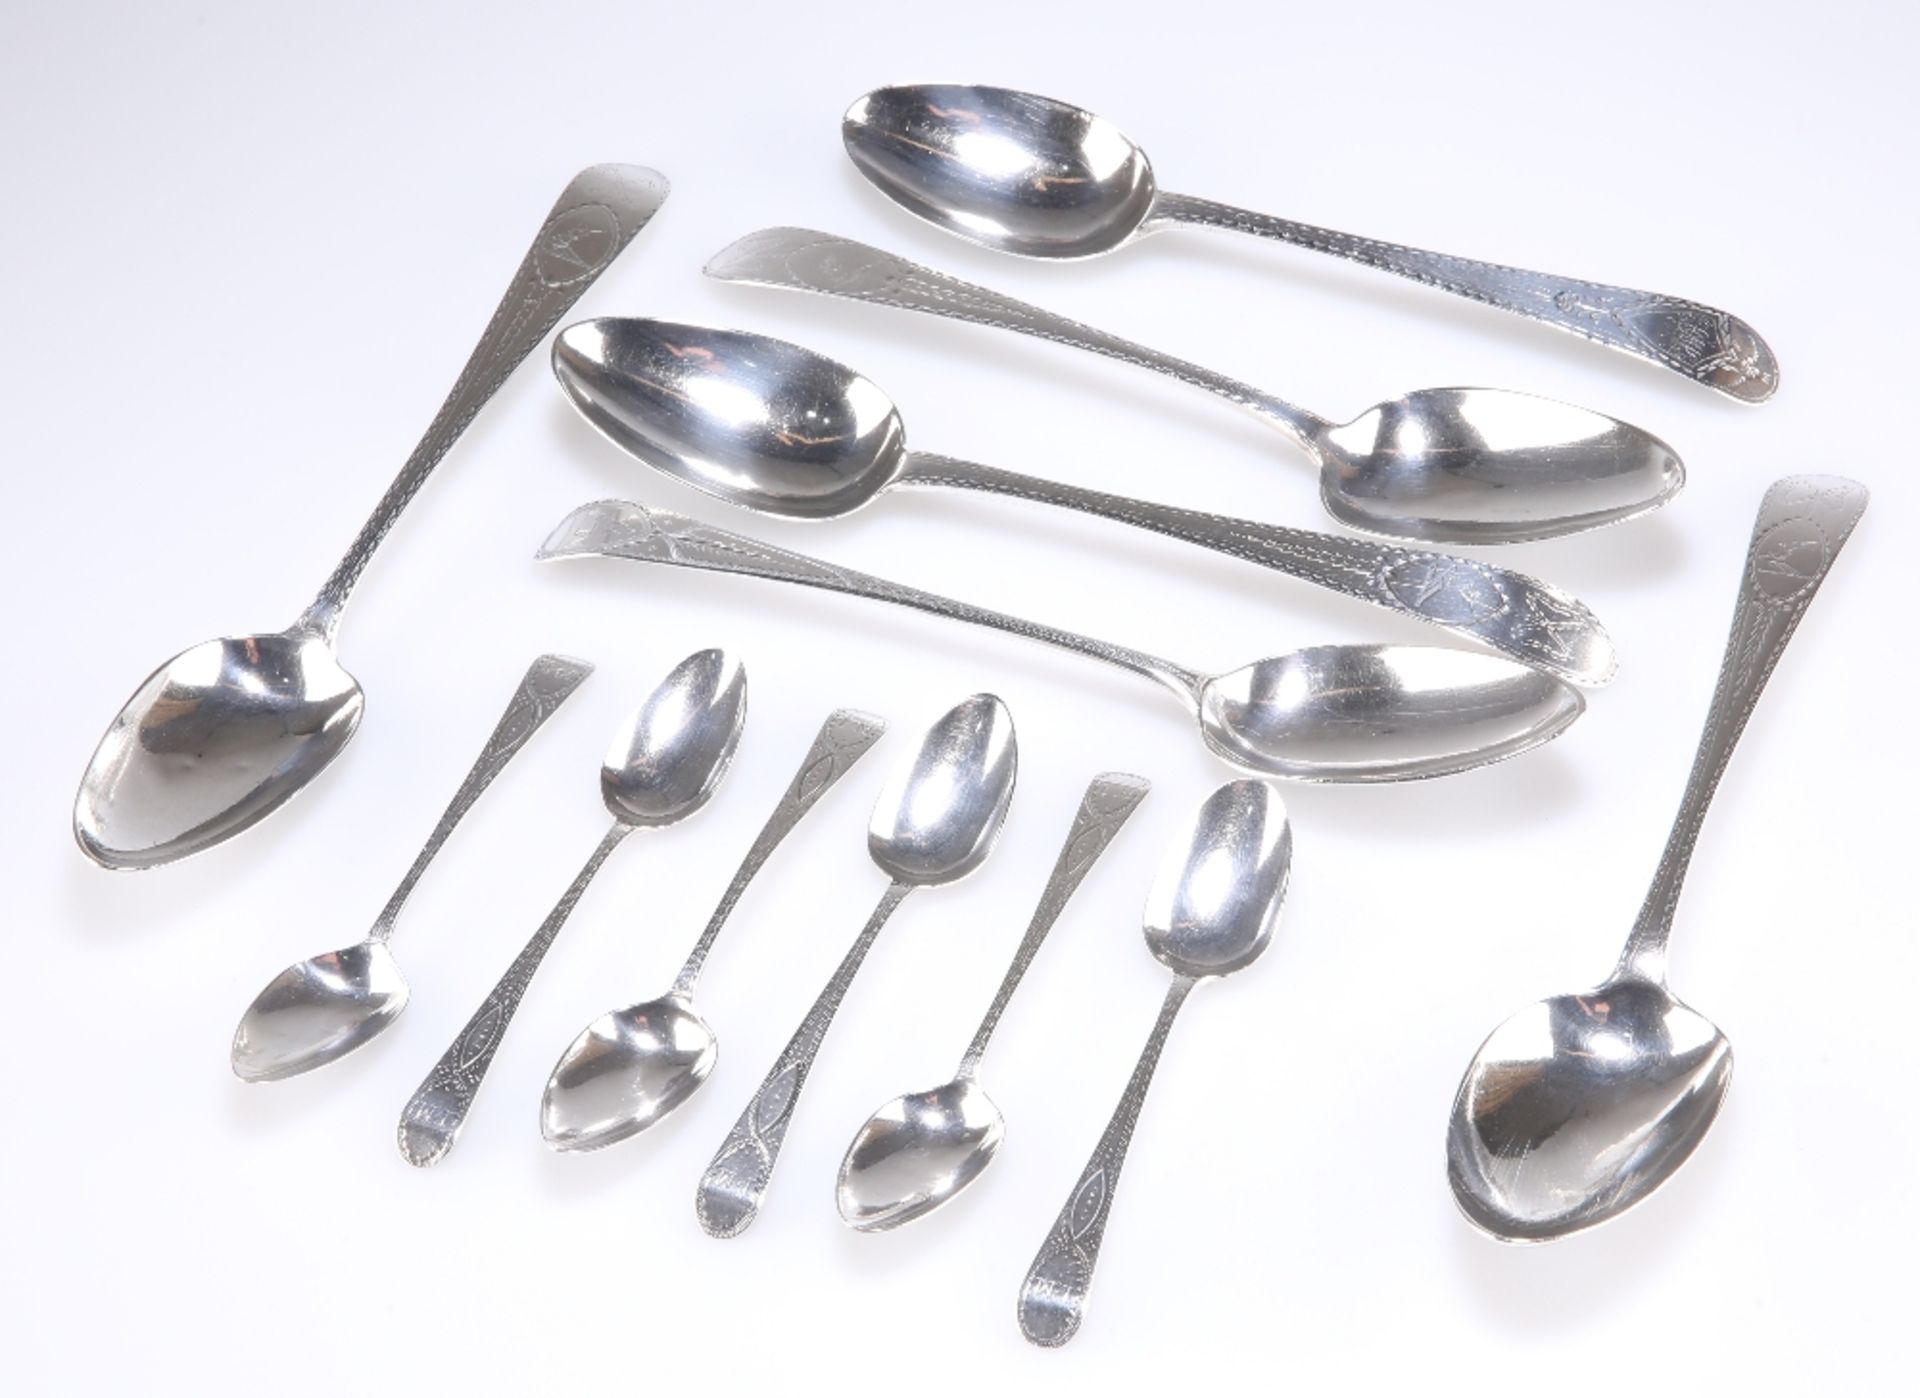 A COLLECTION OF SPOONS